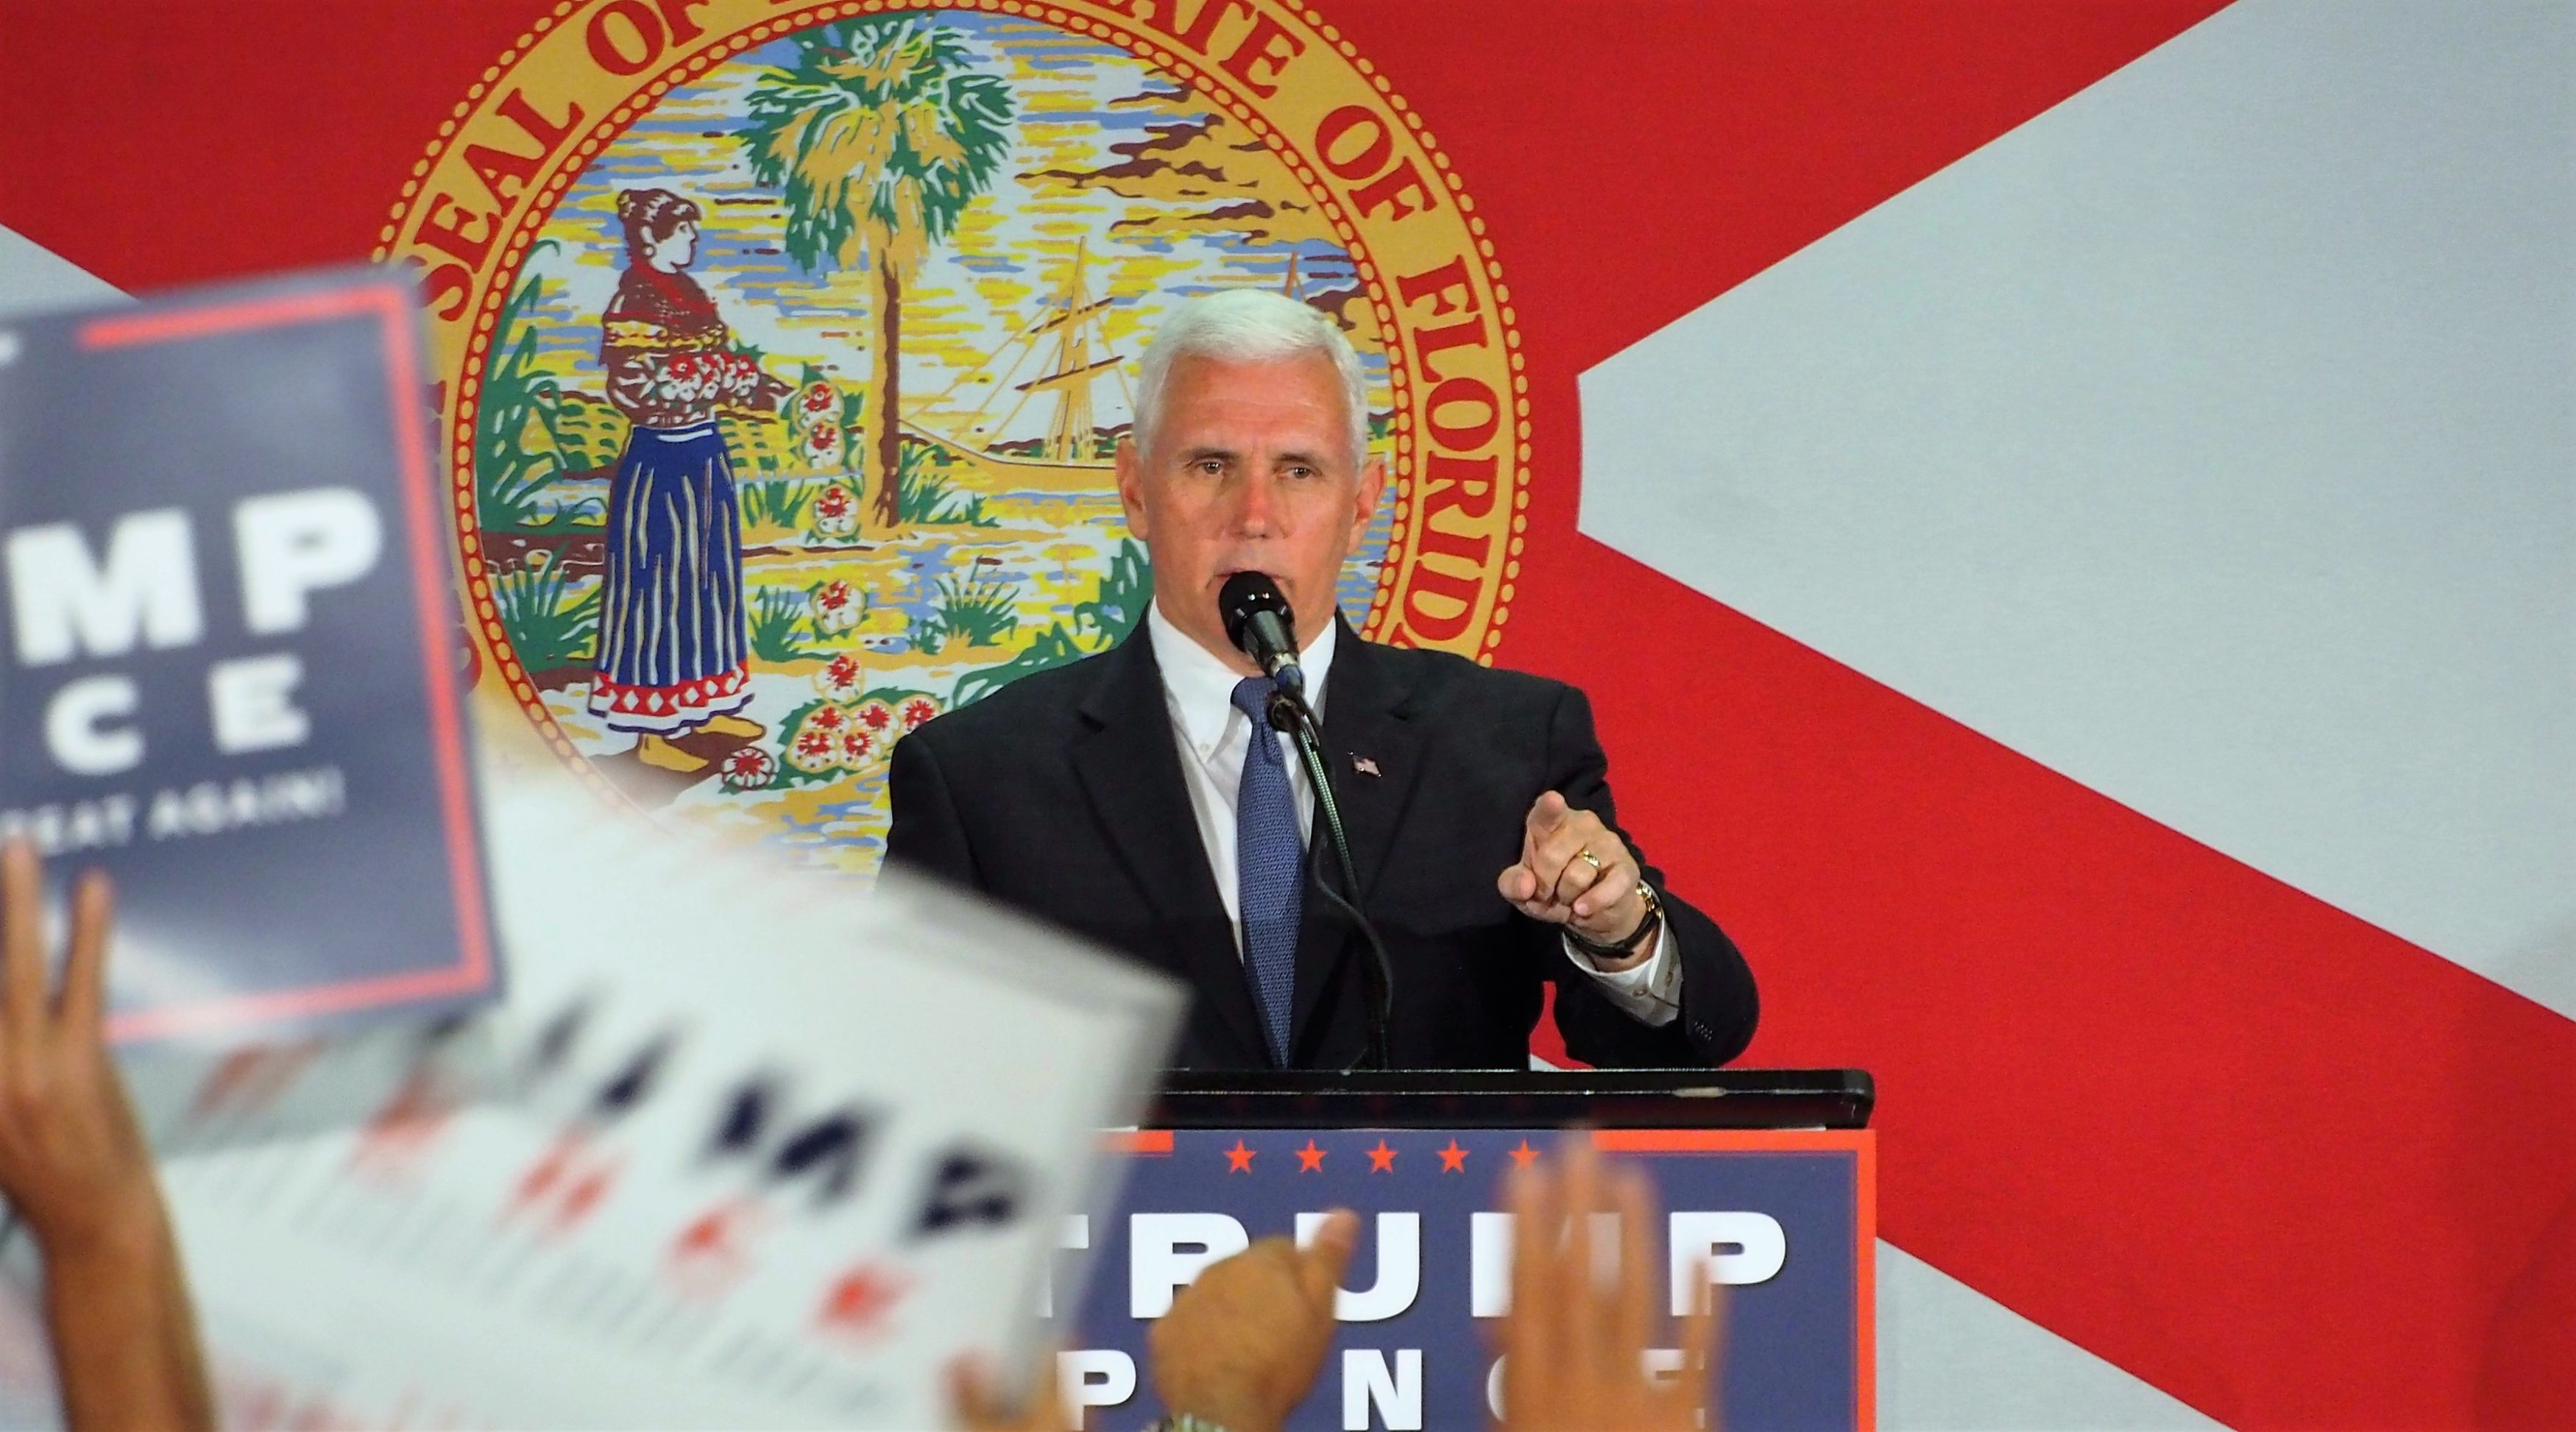 Mike-Pence-in-Cocoa-103116-1-3500x1946.jpg